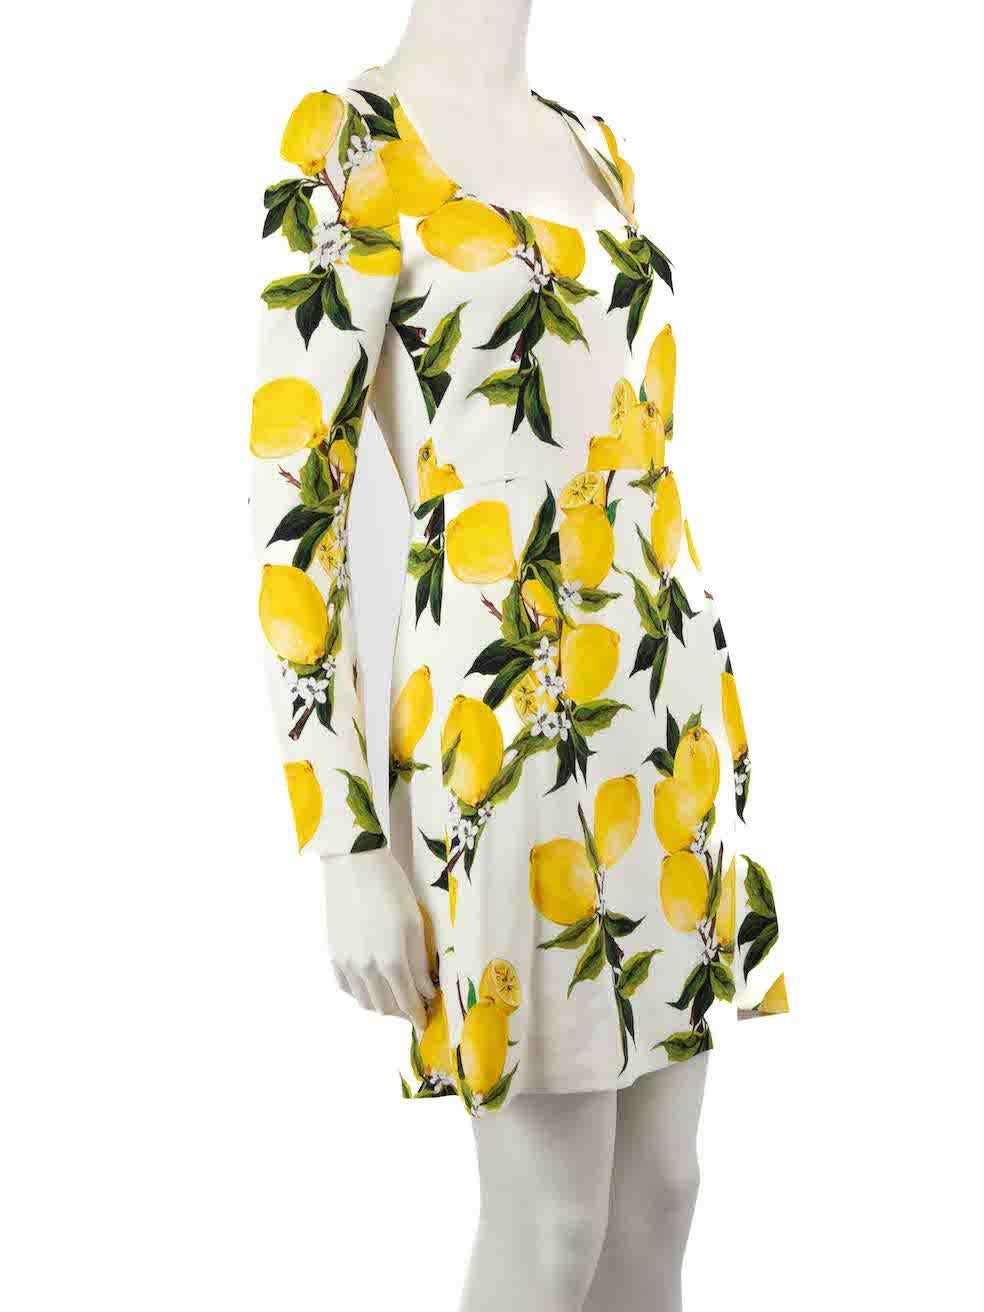 CONDITION is Very good. Minimal wear to dress is evident. Minimal wear to the front, lining and sleeves with light marks on this used Dolce & Gabbana designer resale item.
 
 
 
 Details
 
 
 Multicolour- white, yellow, green
 
 Viscose
 
 Dress
 
